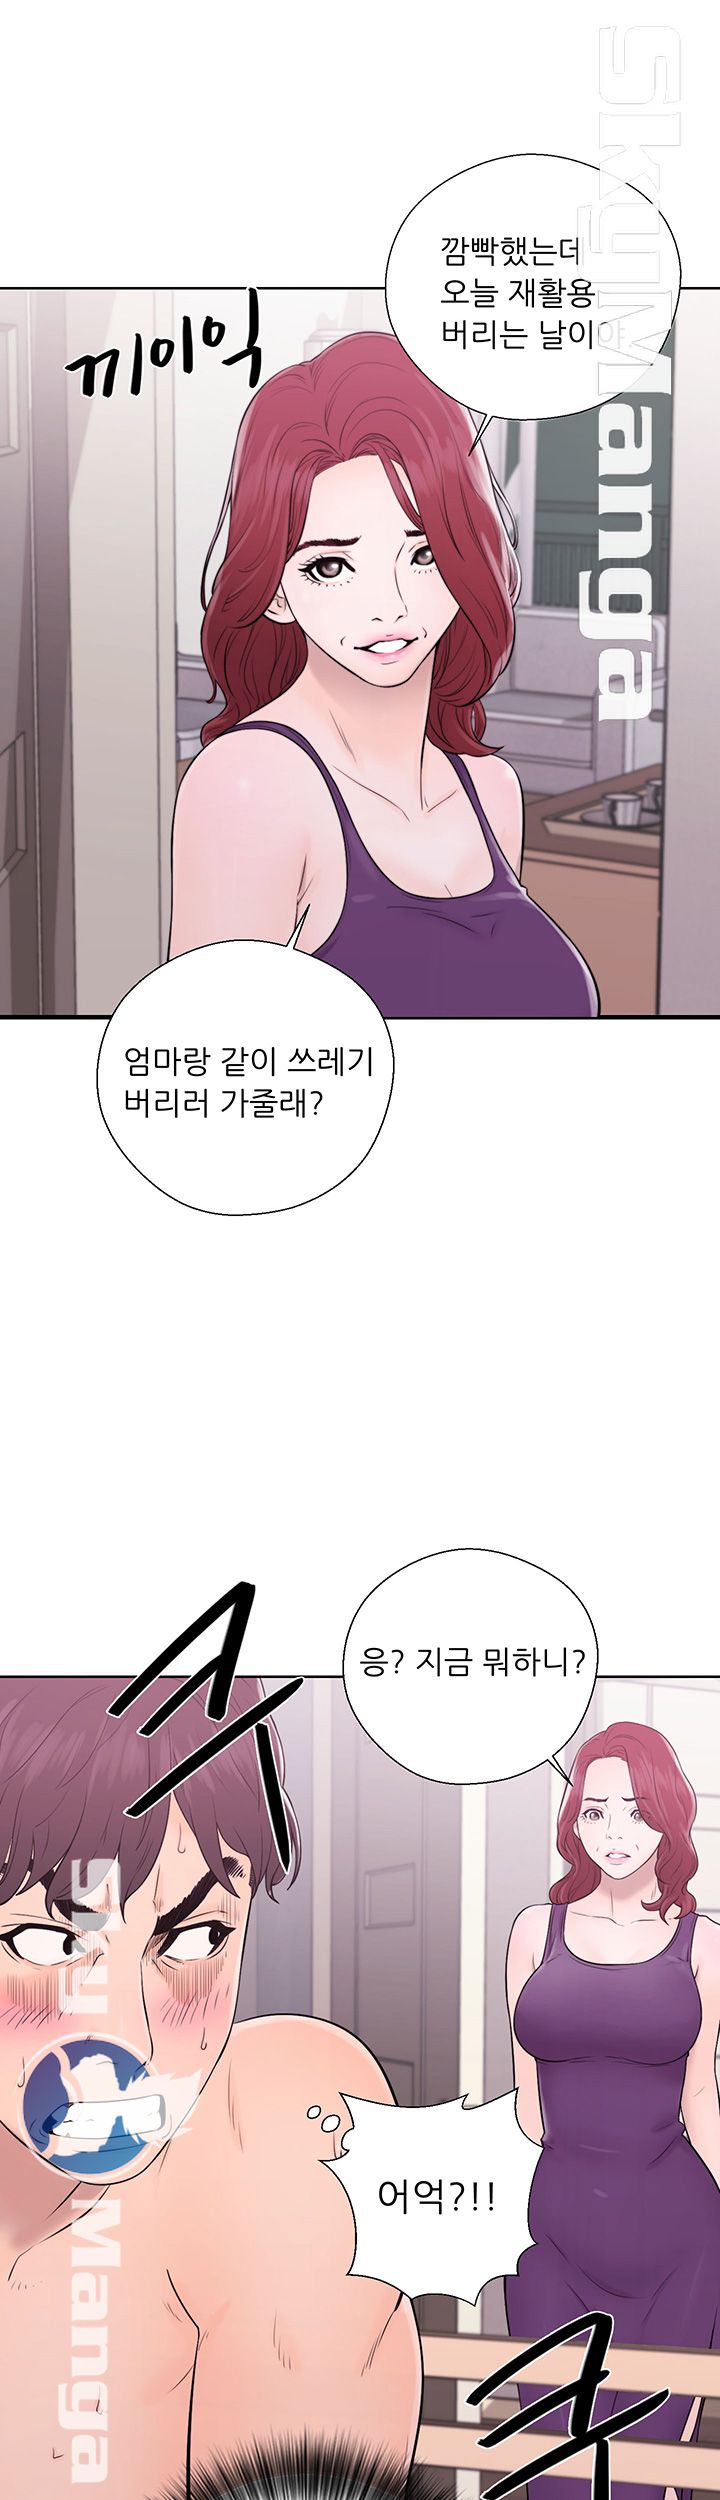 Youthful Raw - Chapter 6 Page 3